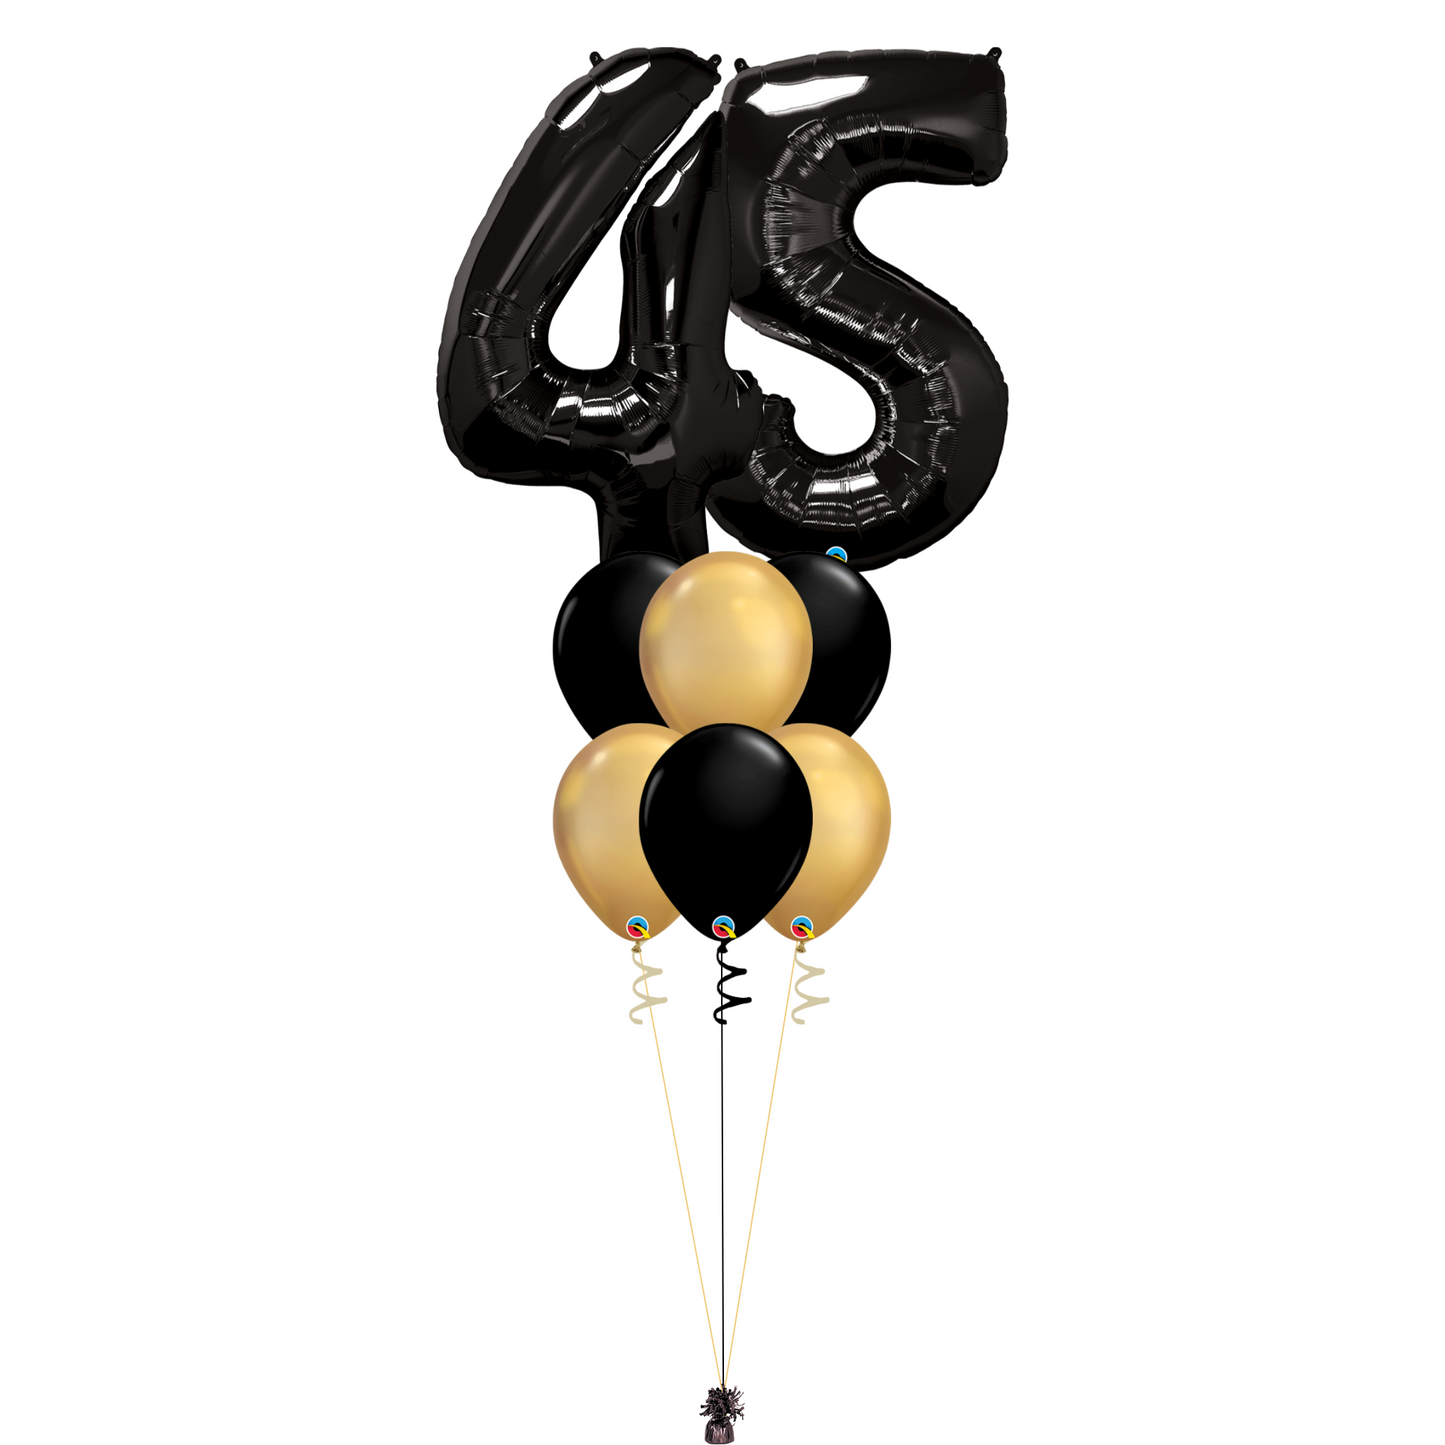 Bouquet of 8 Balloons - Black & Chrome Gold